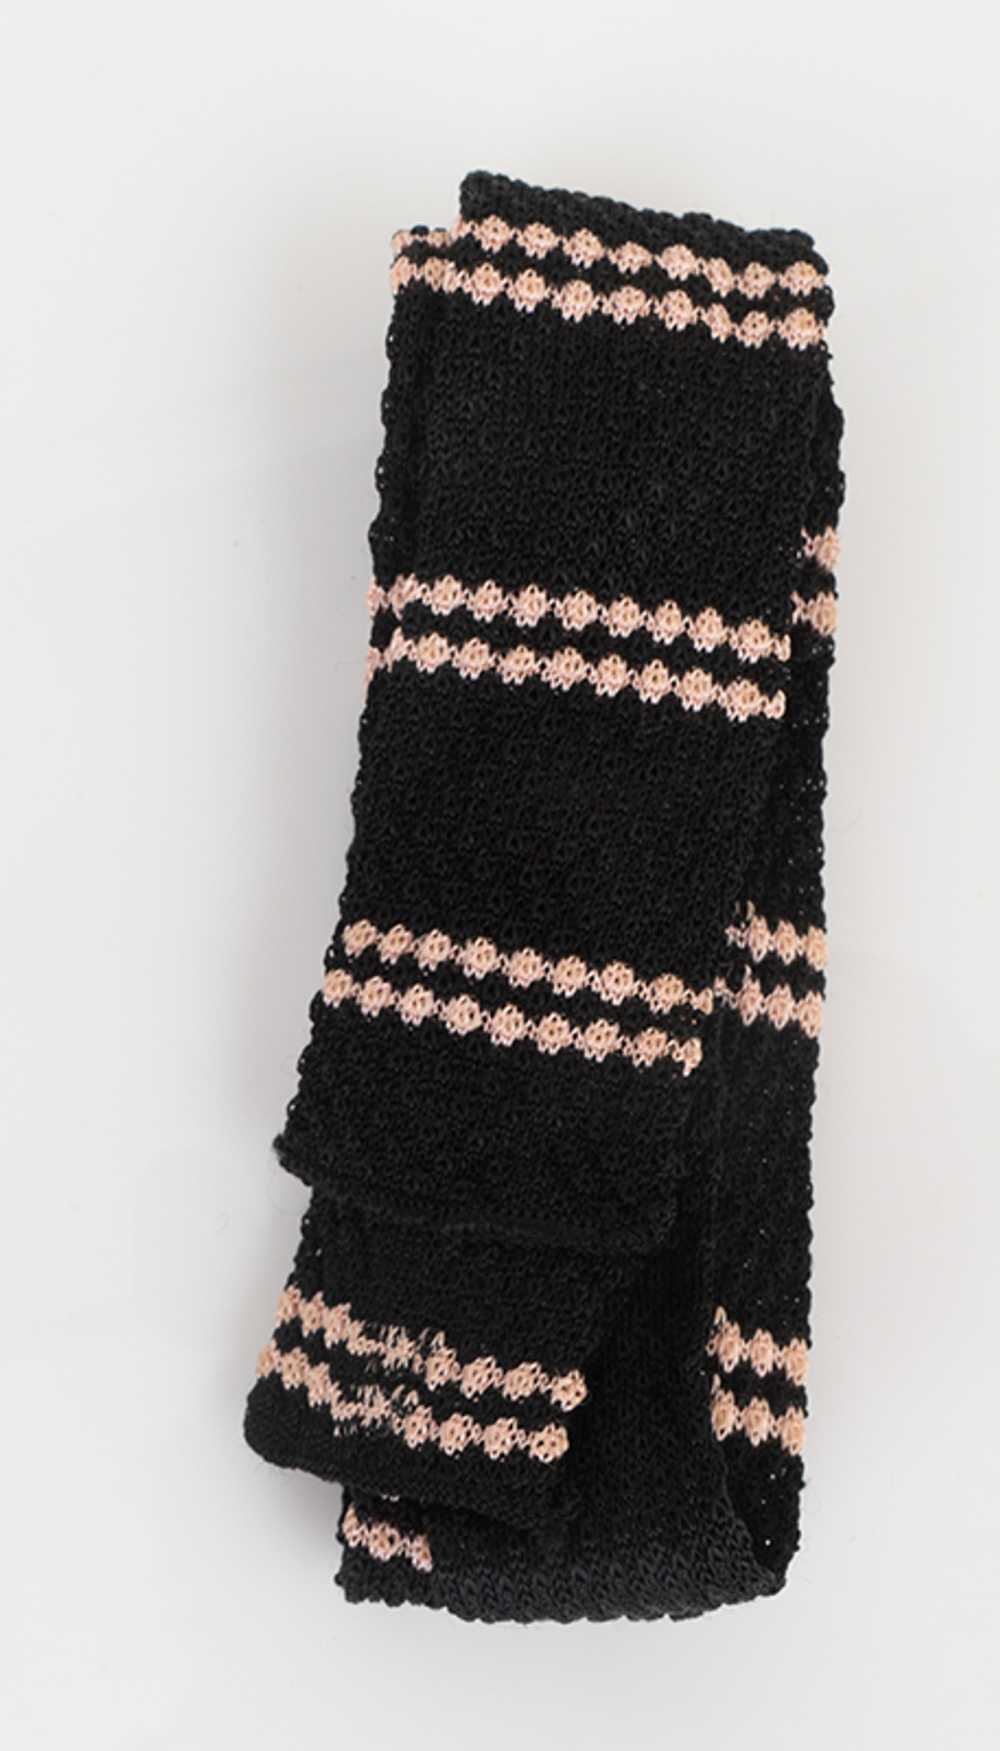 1950s Knit Tie in Black and Pink - image 2